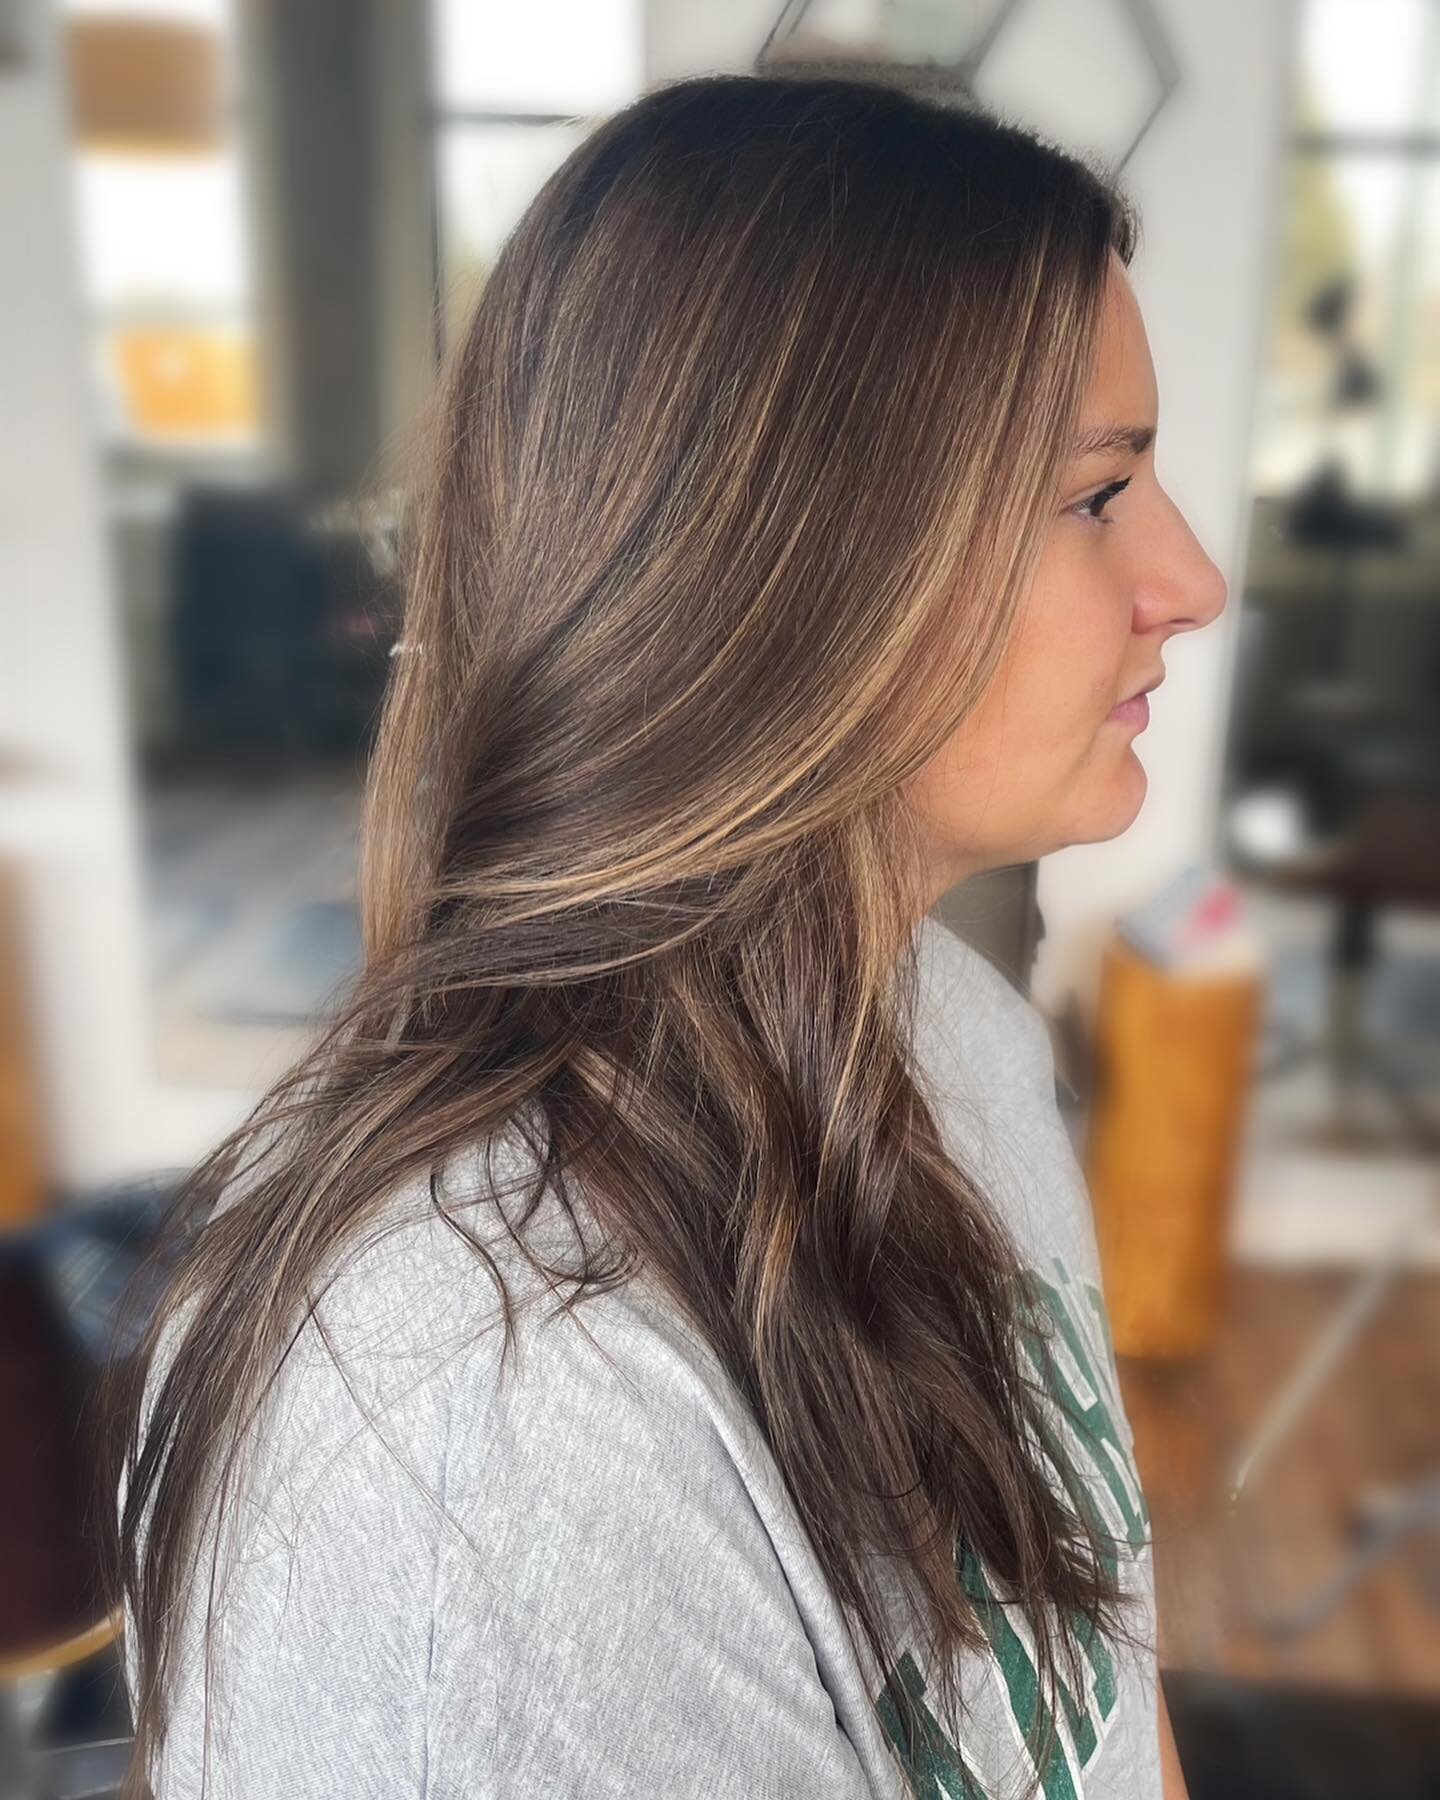 M series winning me over and over and over&hellip; swipe for before
.
.
#colormelt #colormelting #foilayage #babylights #balayage #denverbalayage #denvercolorist #denvercolormelt #coloradohairstylist #denverhairstylist #denverhaircolorist #redken #re